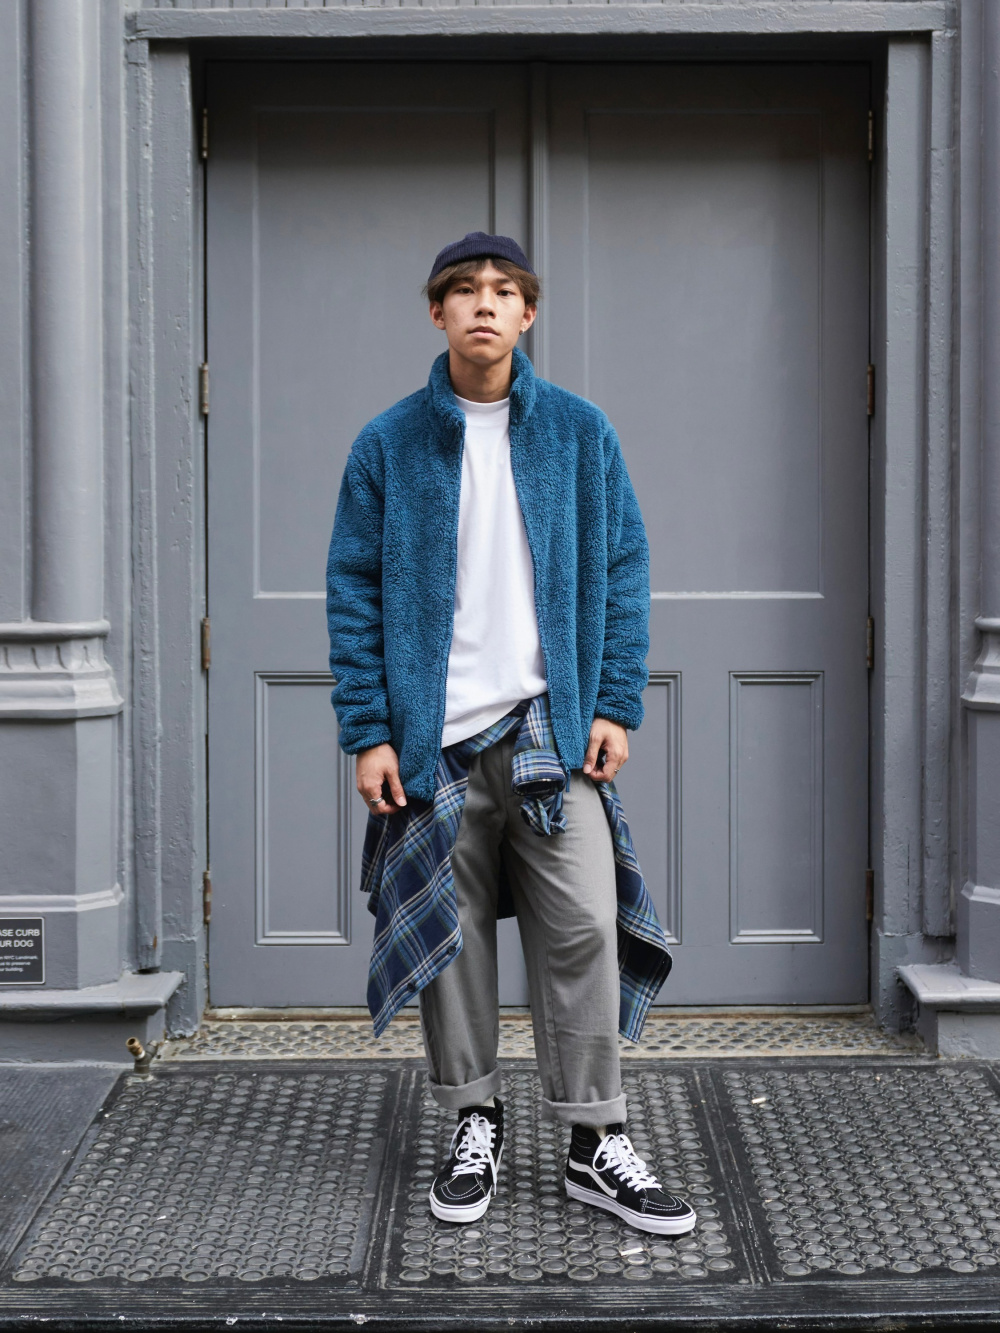 Check styling ideas for「Smooth Fleece Printed Mock Neck Long-Sleeve  T-Shirt、Flannel Easy Ankle Pants」